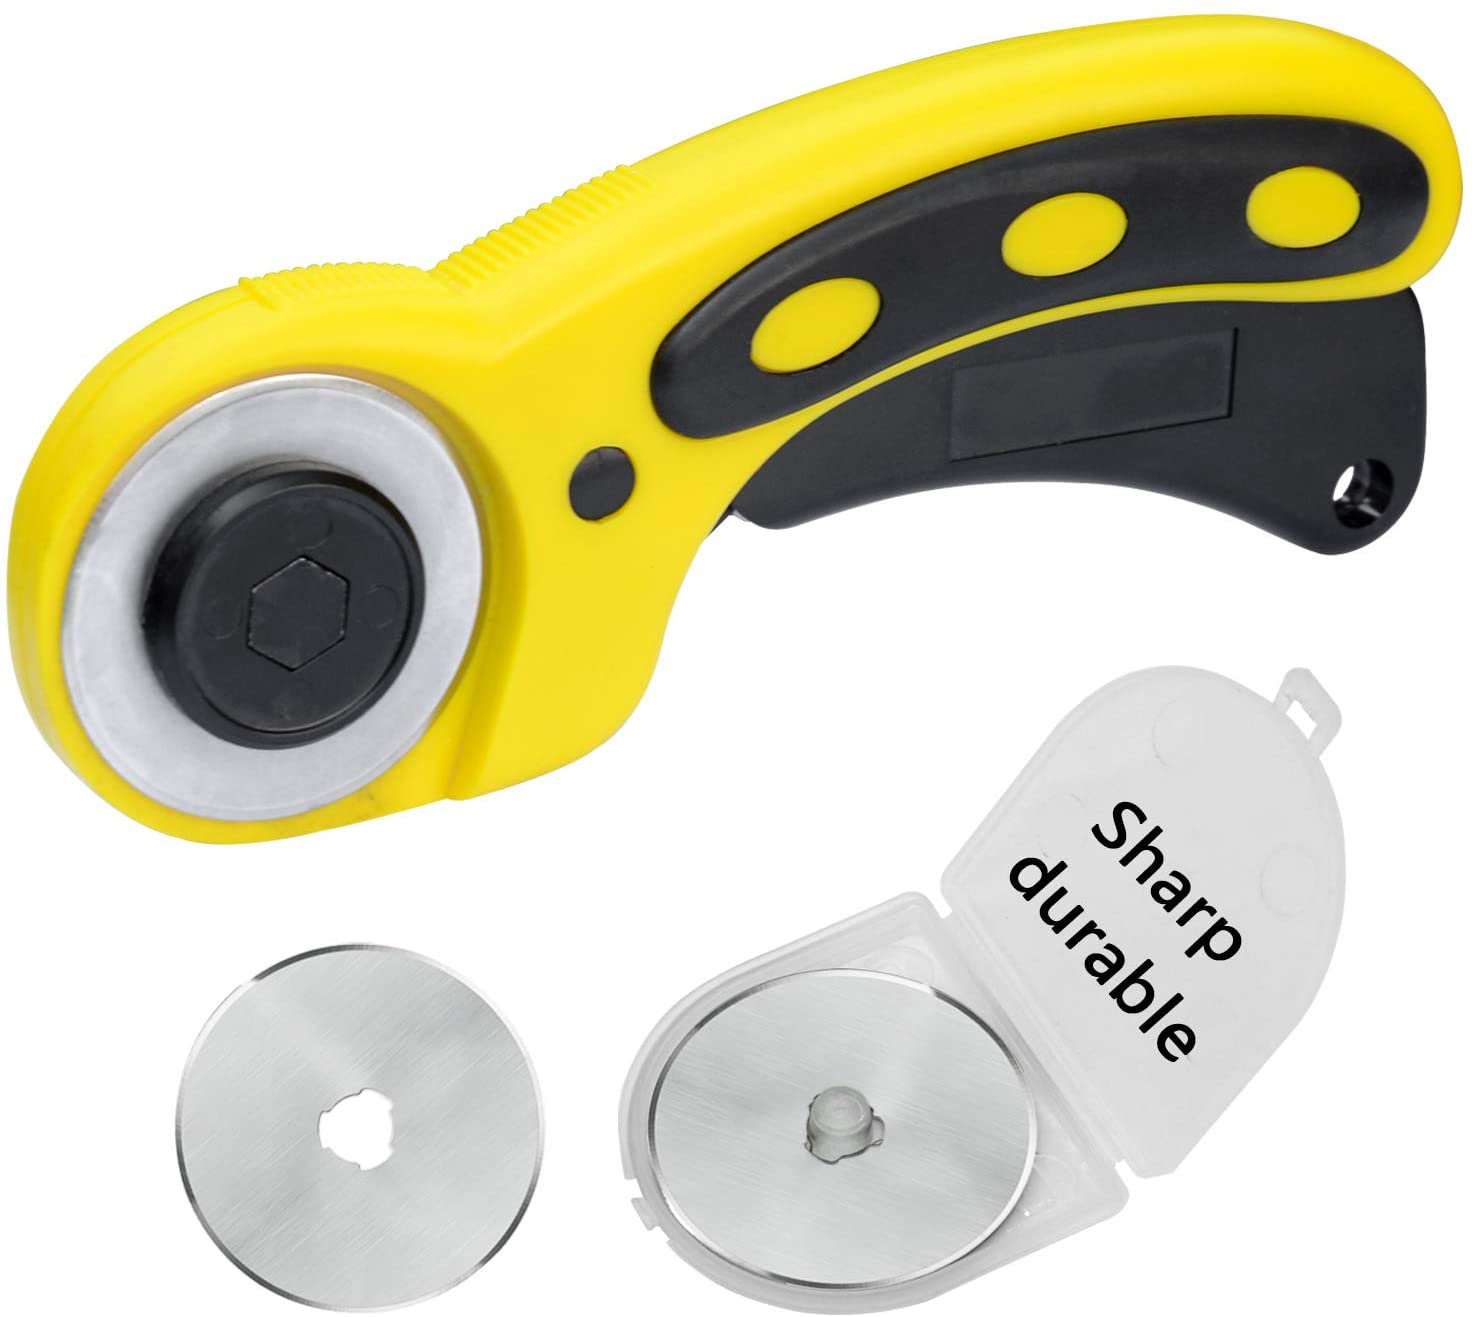 WORKLION Sewing Ergonomic 45mm Rotary Cutter